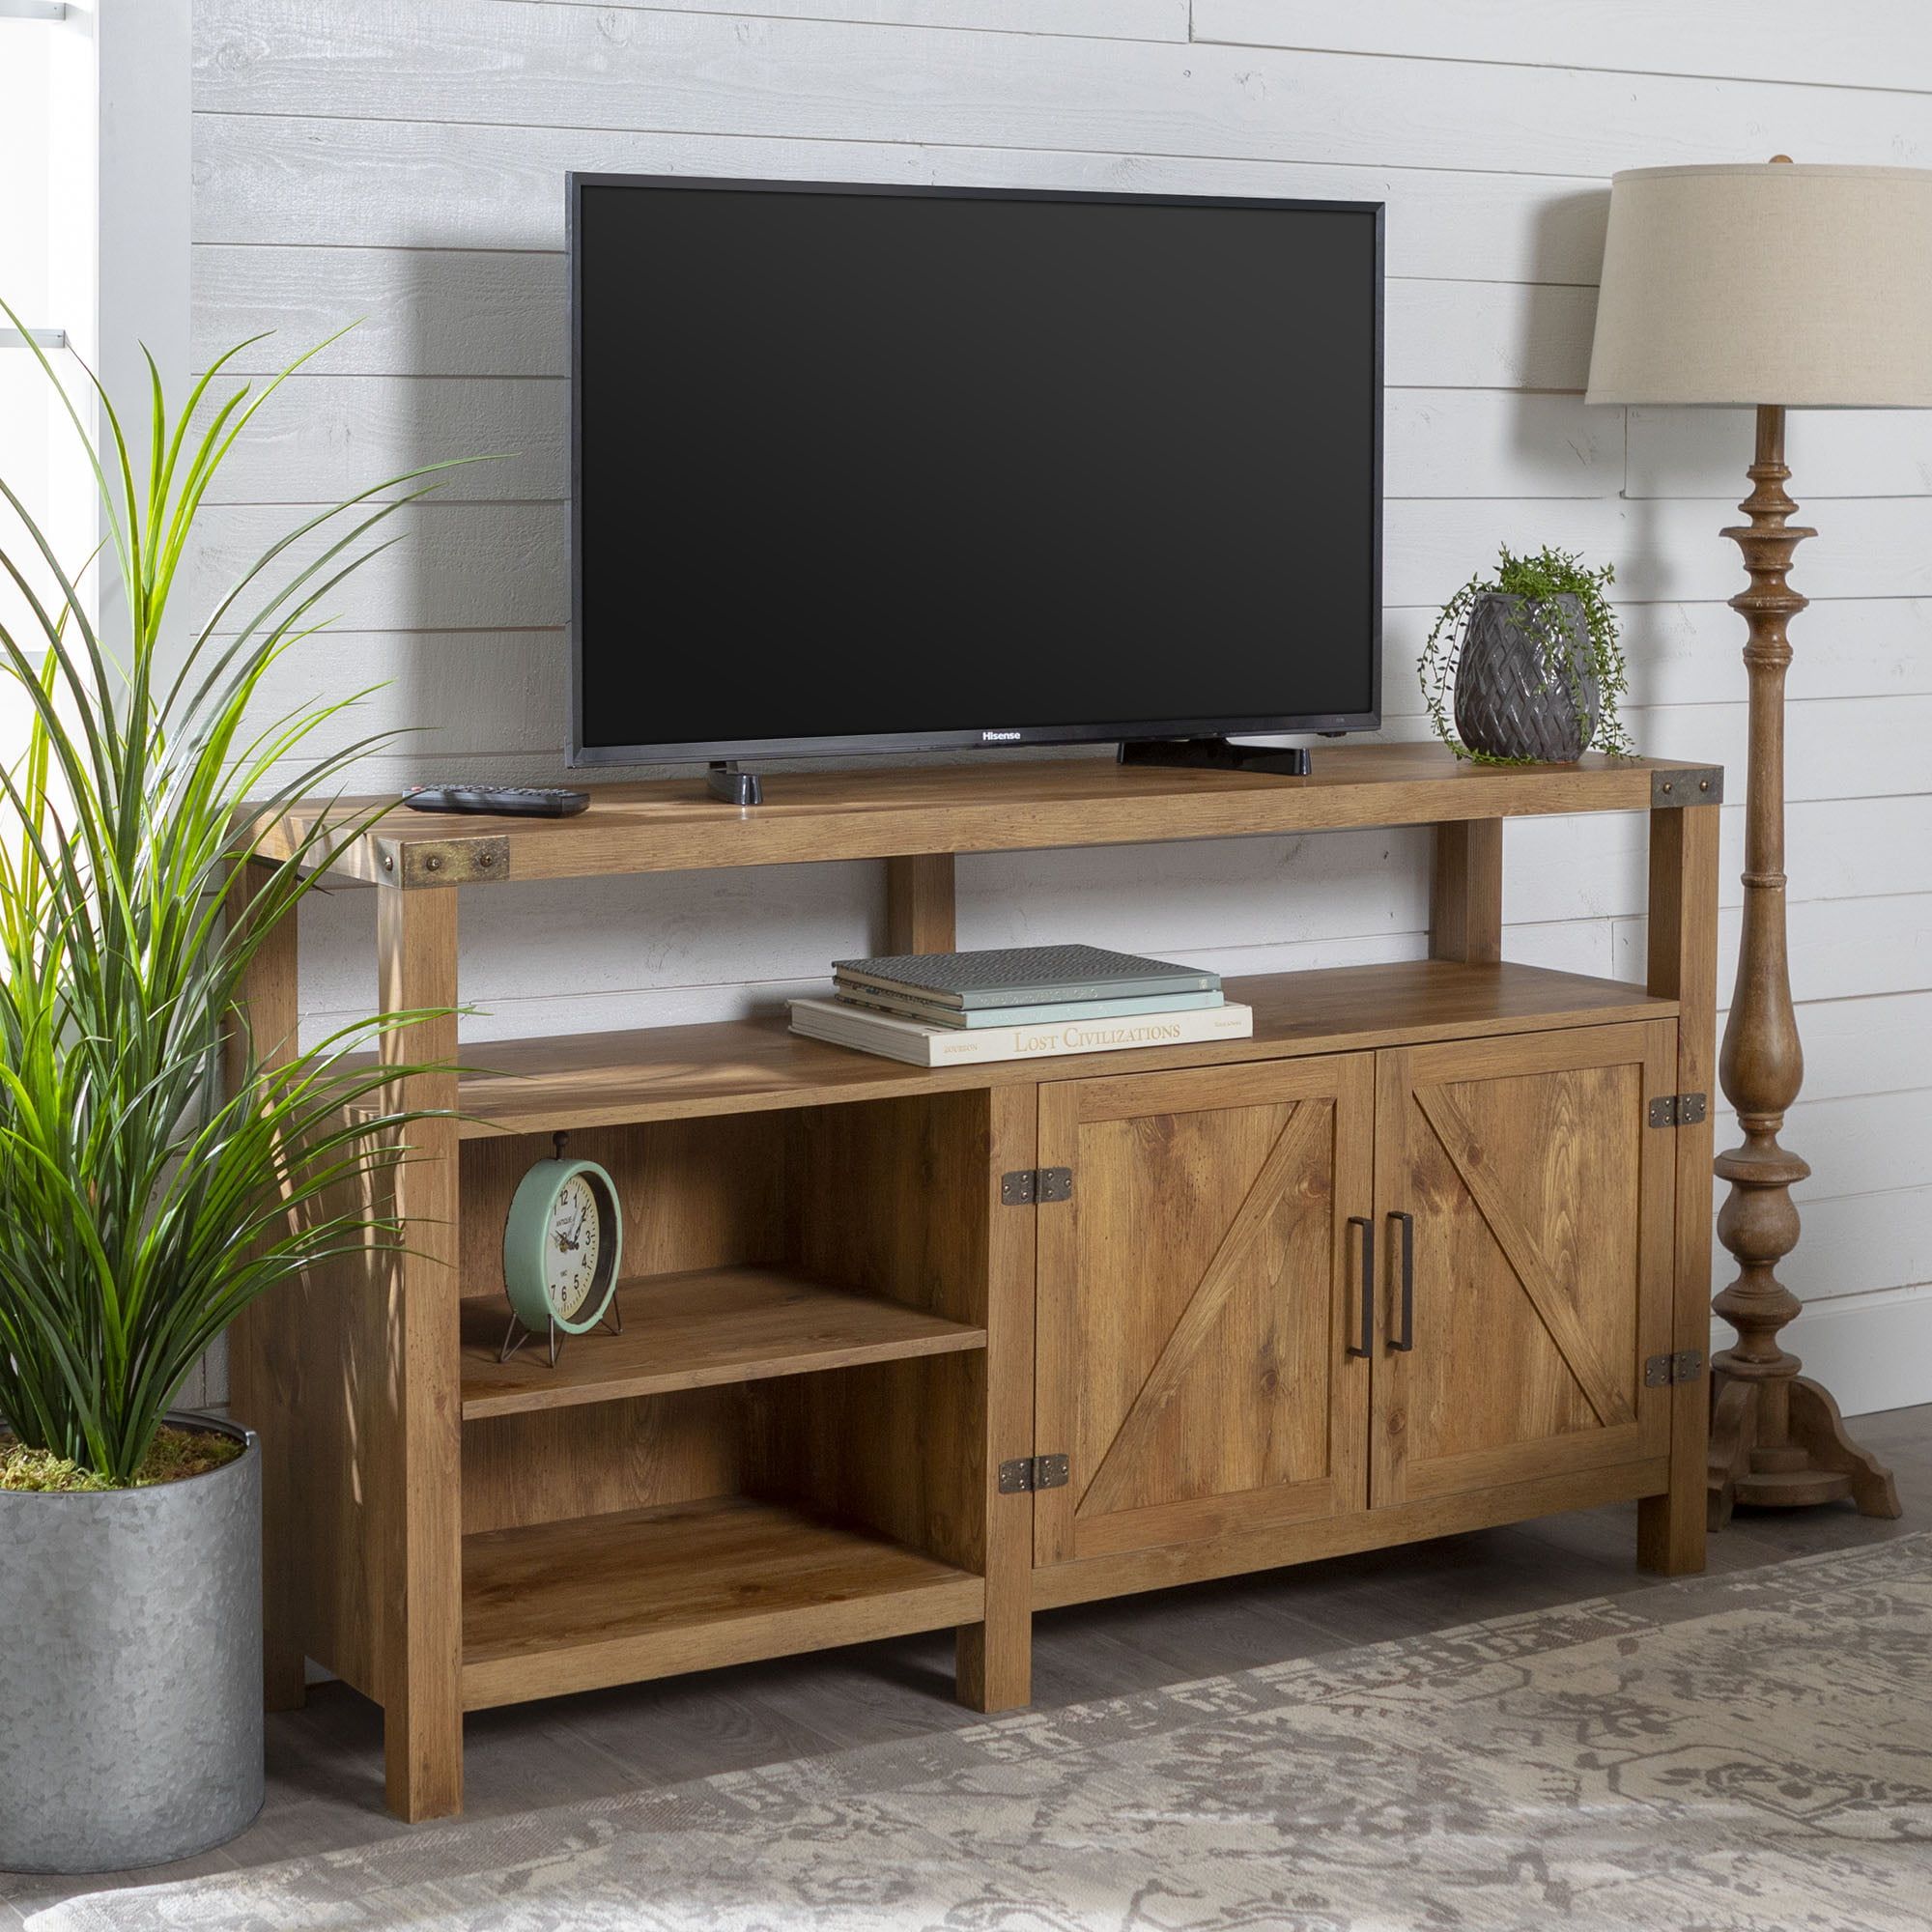 Woven Paths Modern Farmhouse Highboy Tv Stand For Tvs Up To 65 Regarding Farmhouse Stands For Tvs (Gallery 16 of 20)